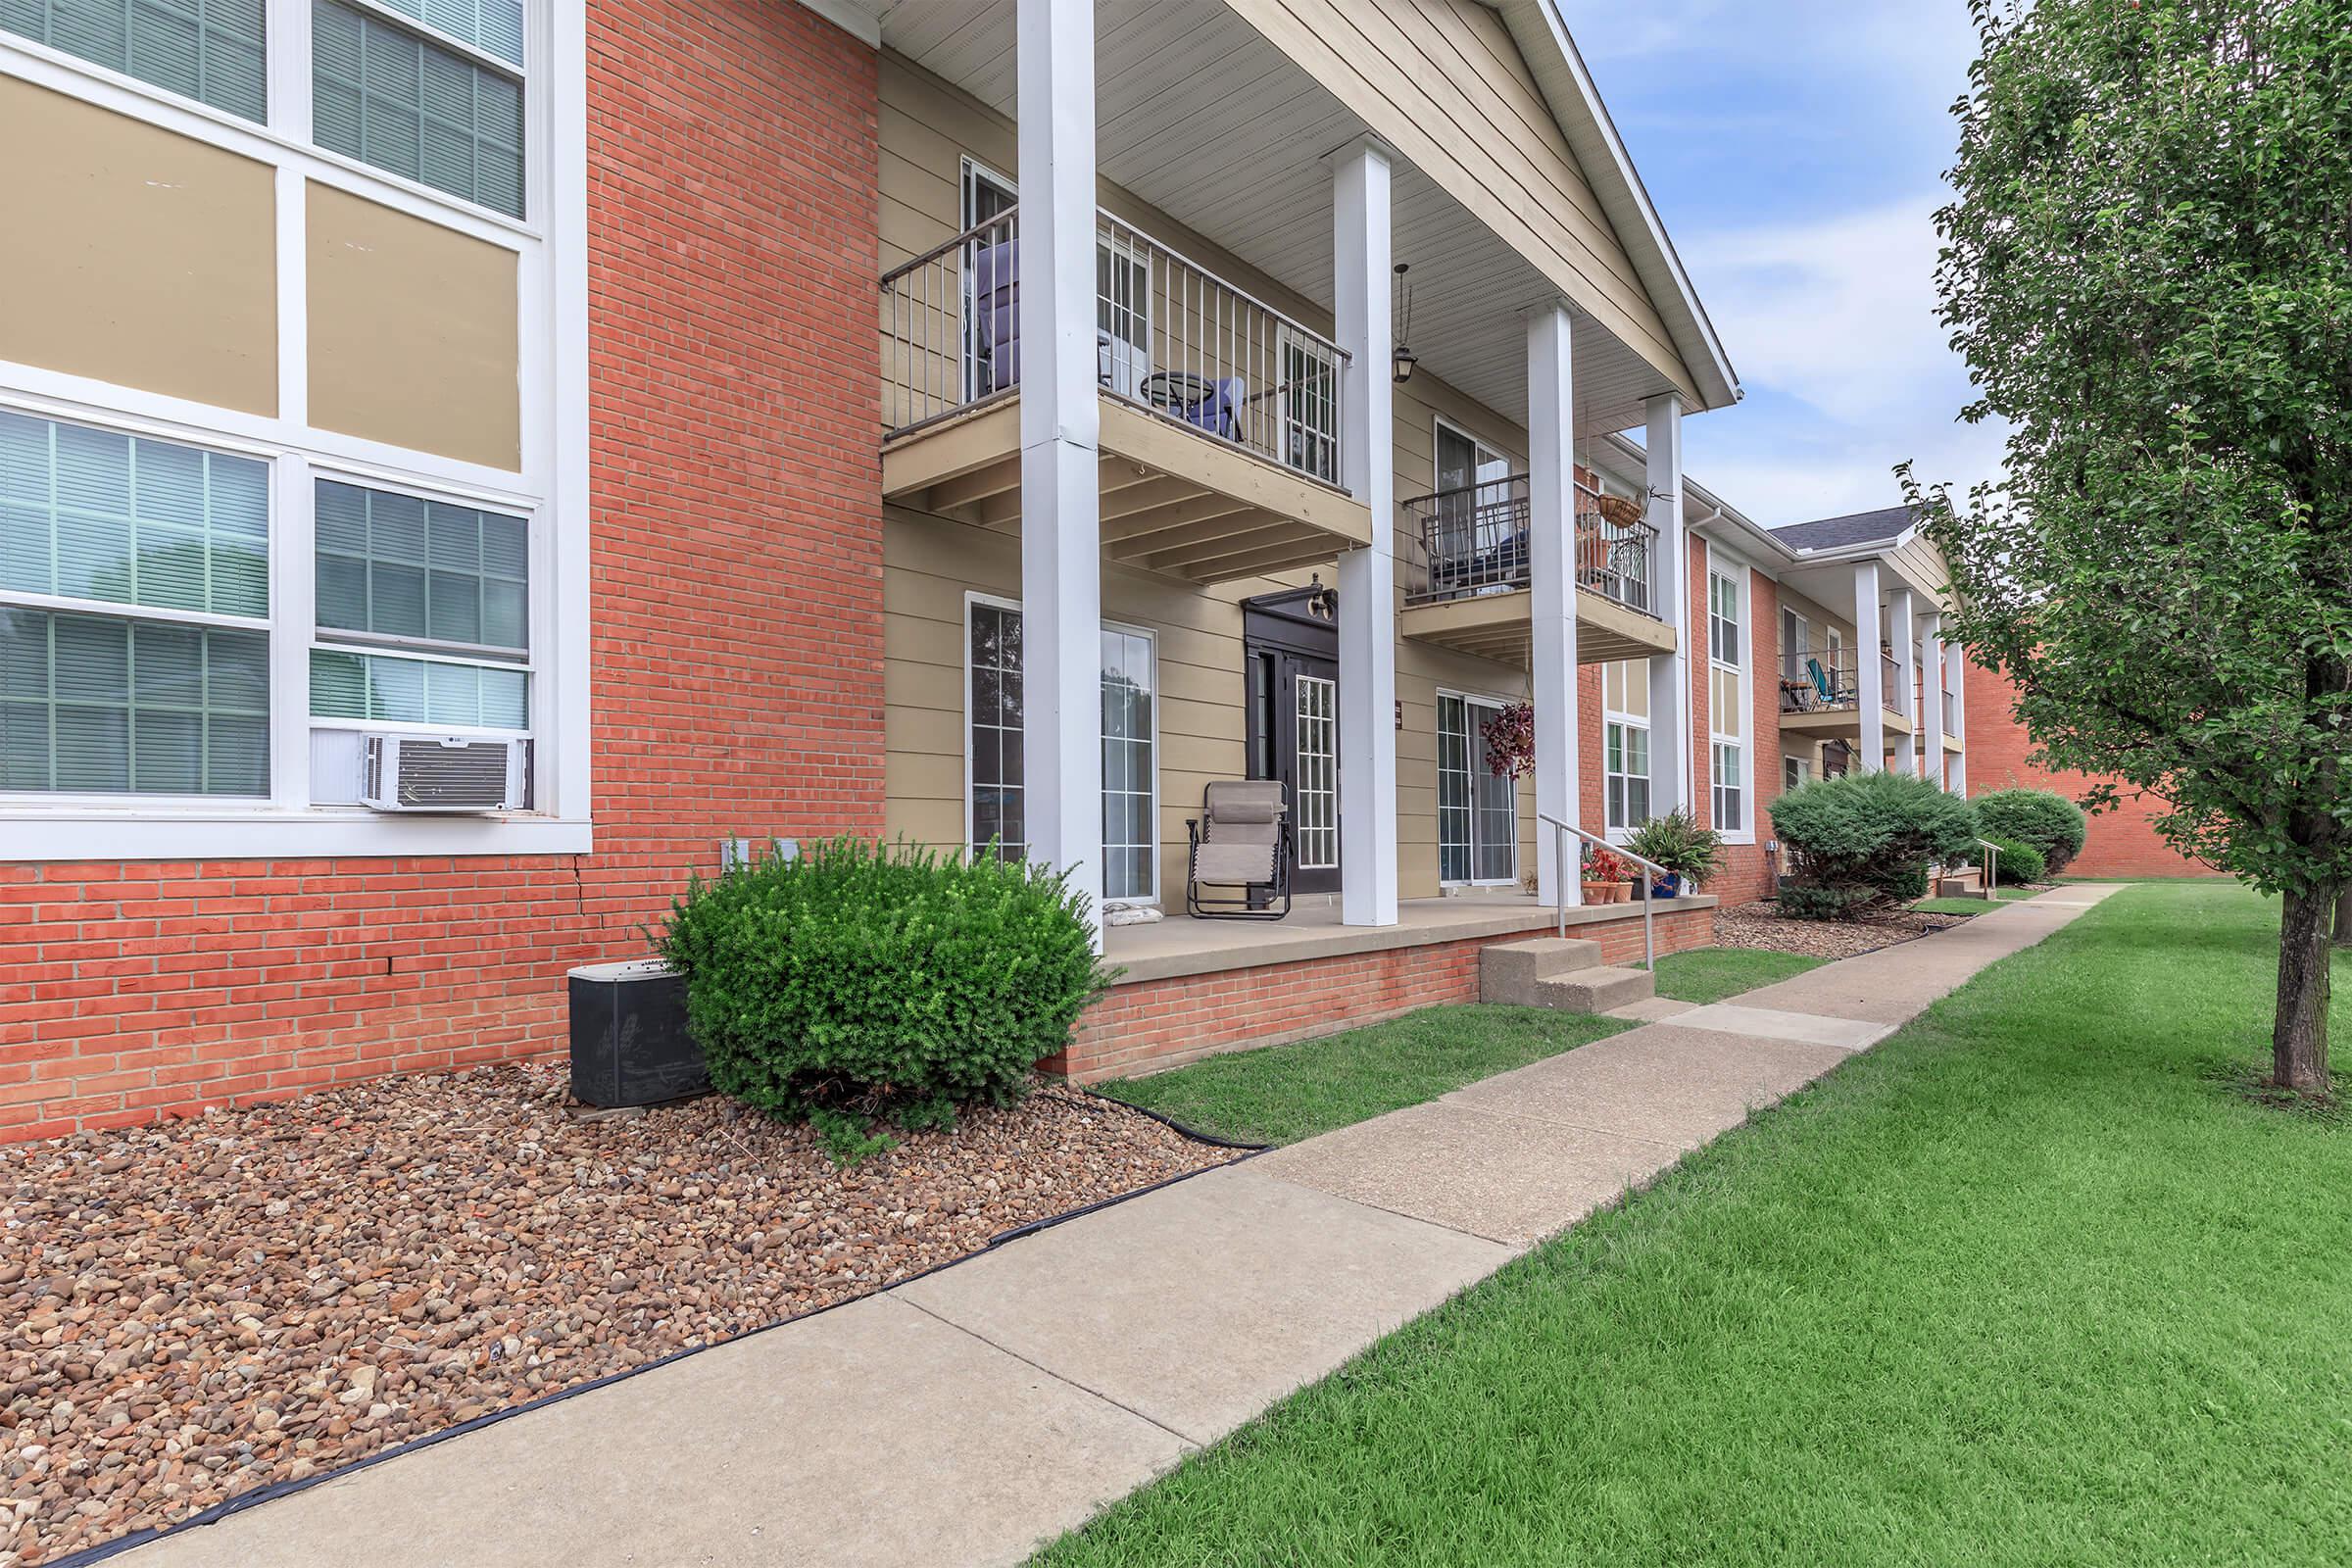 APARTMENTS FOR RENT IN EVANSVILLE, IN